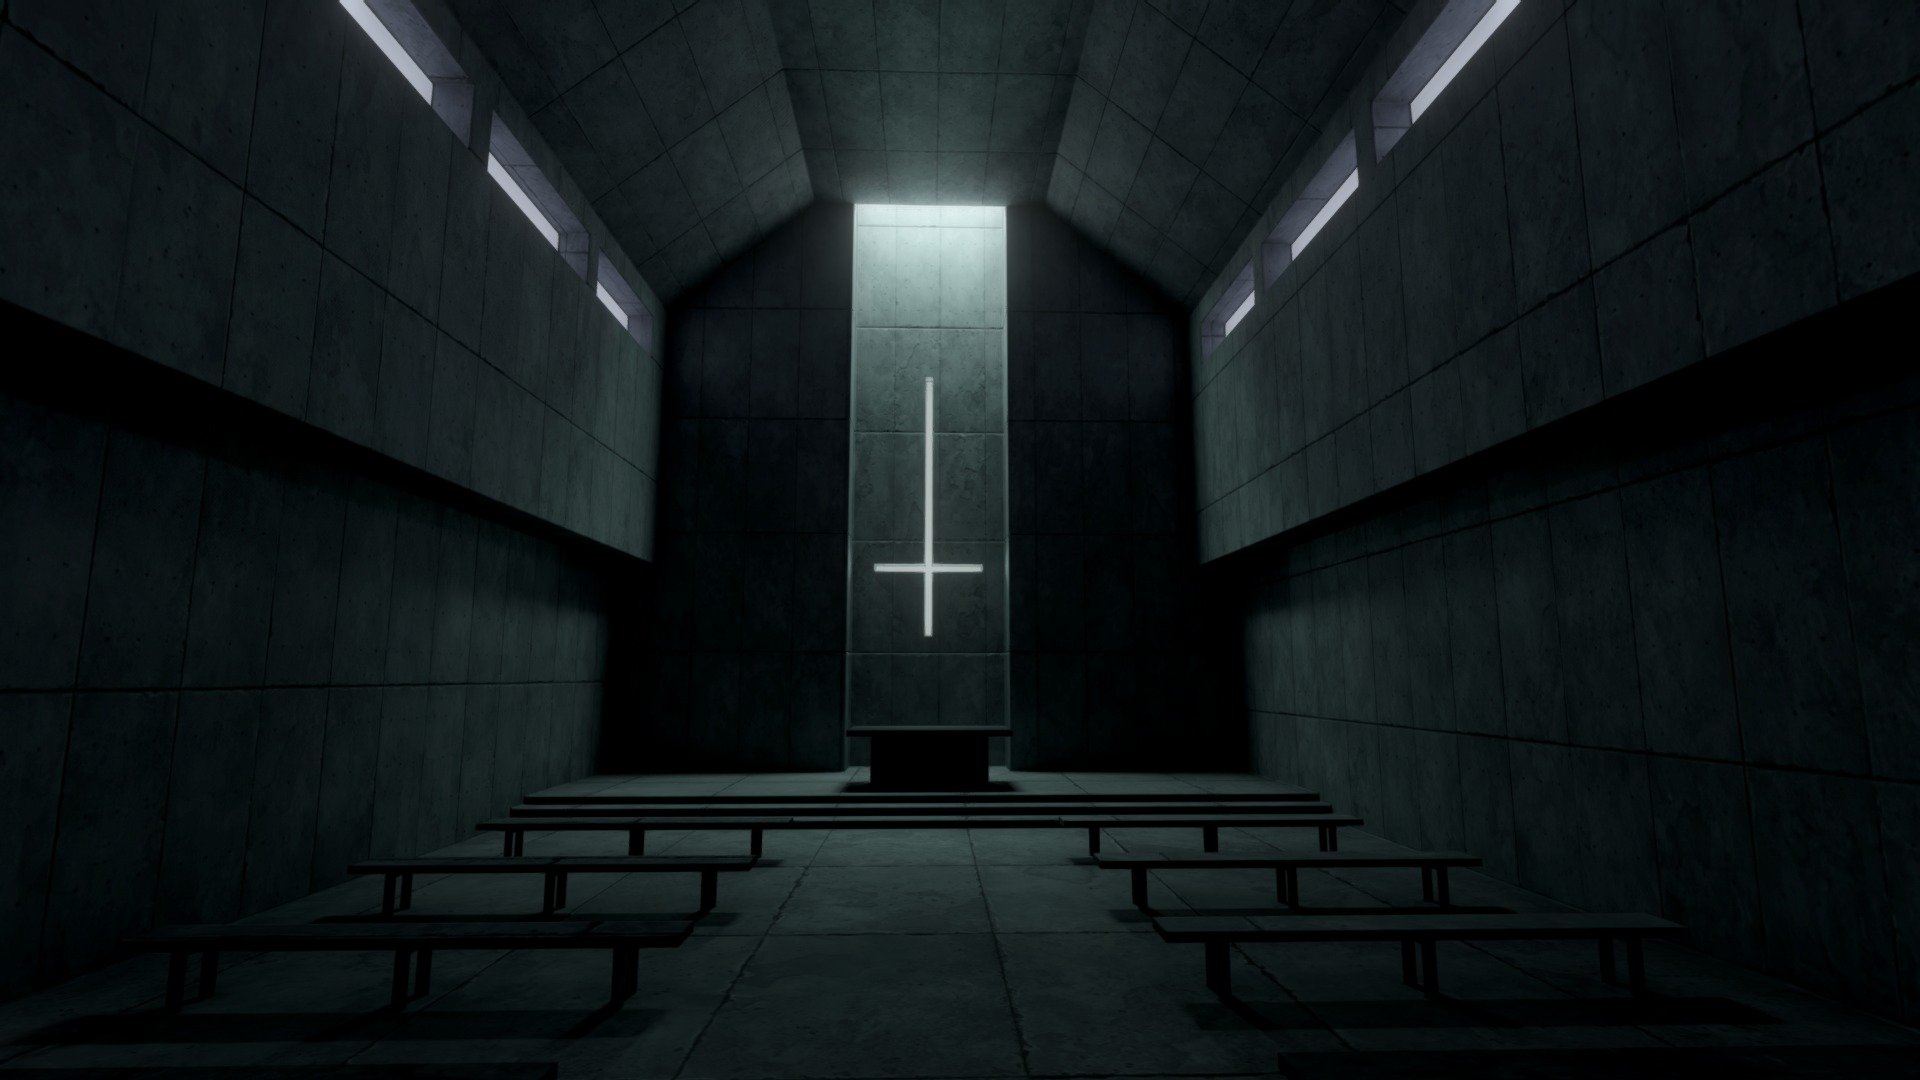 Dark interior inspired by Tadao Ando architecture. Futuristic brutalist minimalist church features a single beam of light illuminating an empty altar with pews for seating. The walls have smooth concrete panels and sharp edges, creating a calm and contemplative atmosphere 3d model